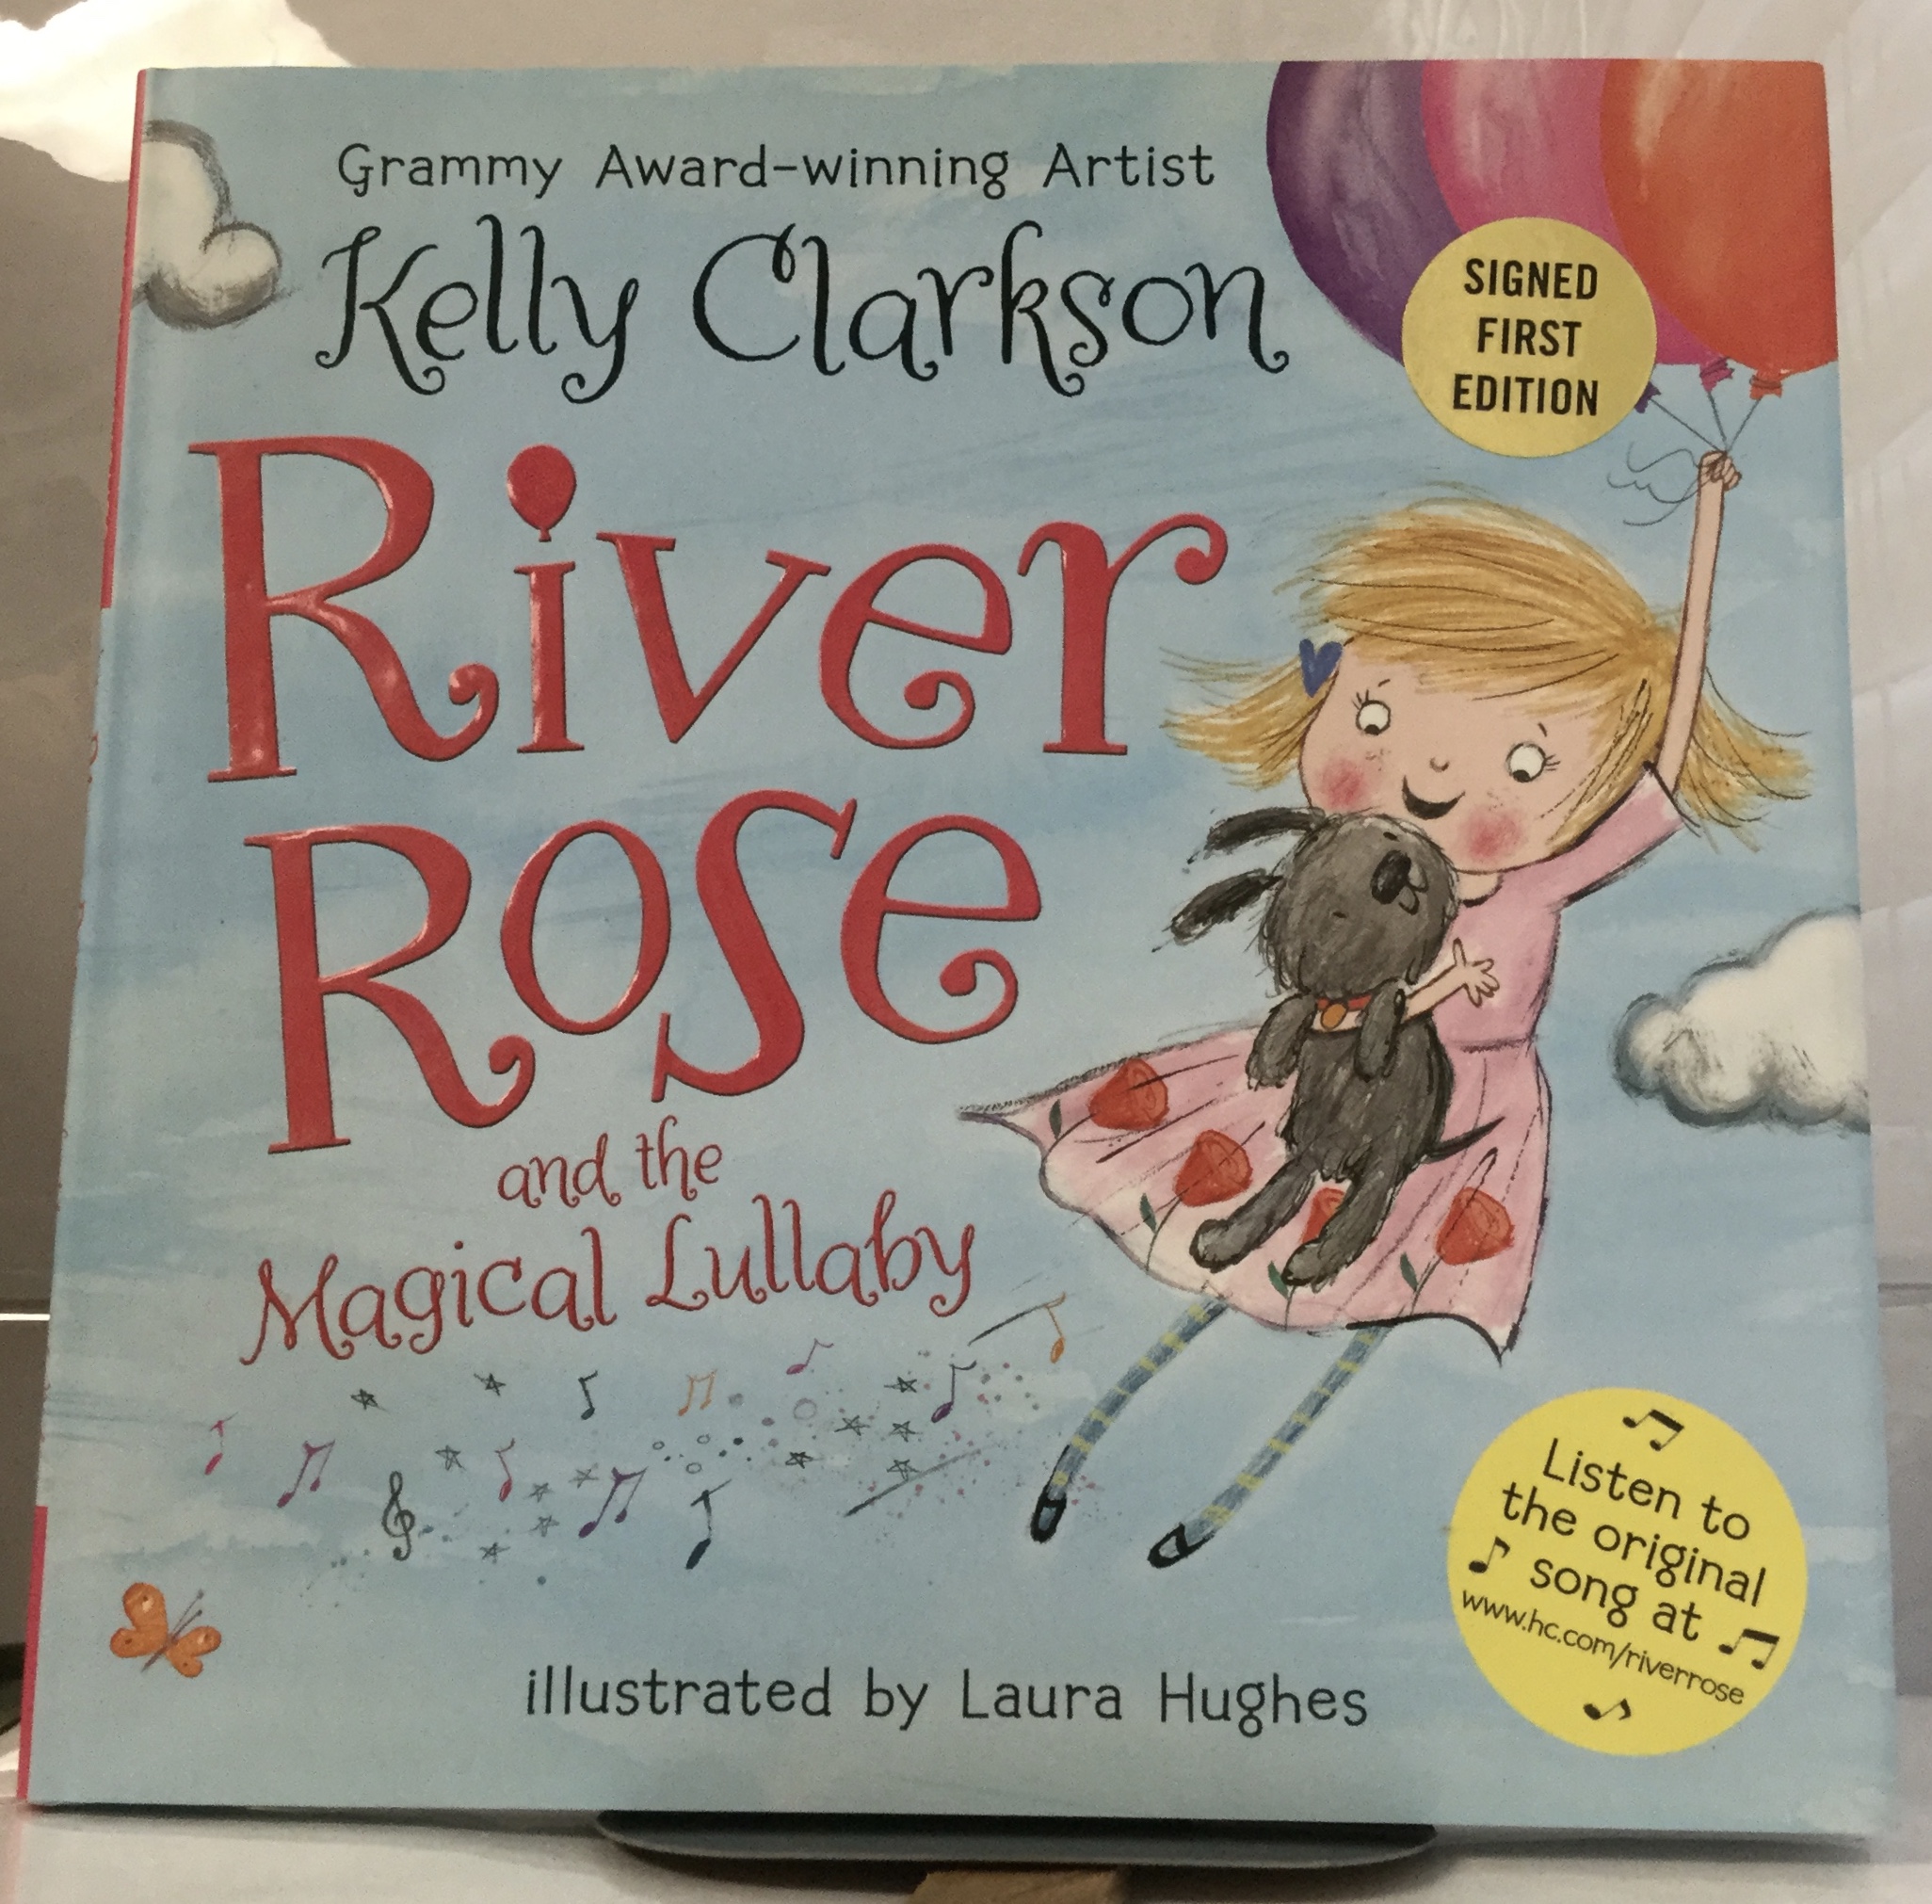 River Rose and the Magical Lullaby Clarkson, Kelly [Very Good] [Hardcover] VG+, in VG+ DJ. Signed by author (Grammy-winning artist Kelly Clarkson) in yellow ink on ffep,  signed first edition  sticker on DJ. First Edition, First Printing (complete number line). Only very light signs of wear to exterior, two spots (one on top edge and one on bottom edge) where bumping has occured, binding solid and straight, interior clean and unmarked. Jacket has only very light signs of general wear, else fully intact and in great shape. Appears unread, a very nice copy in a very nice jacket.